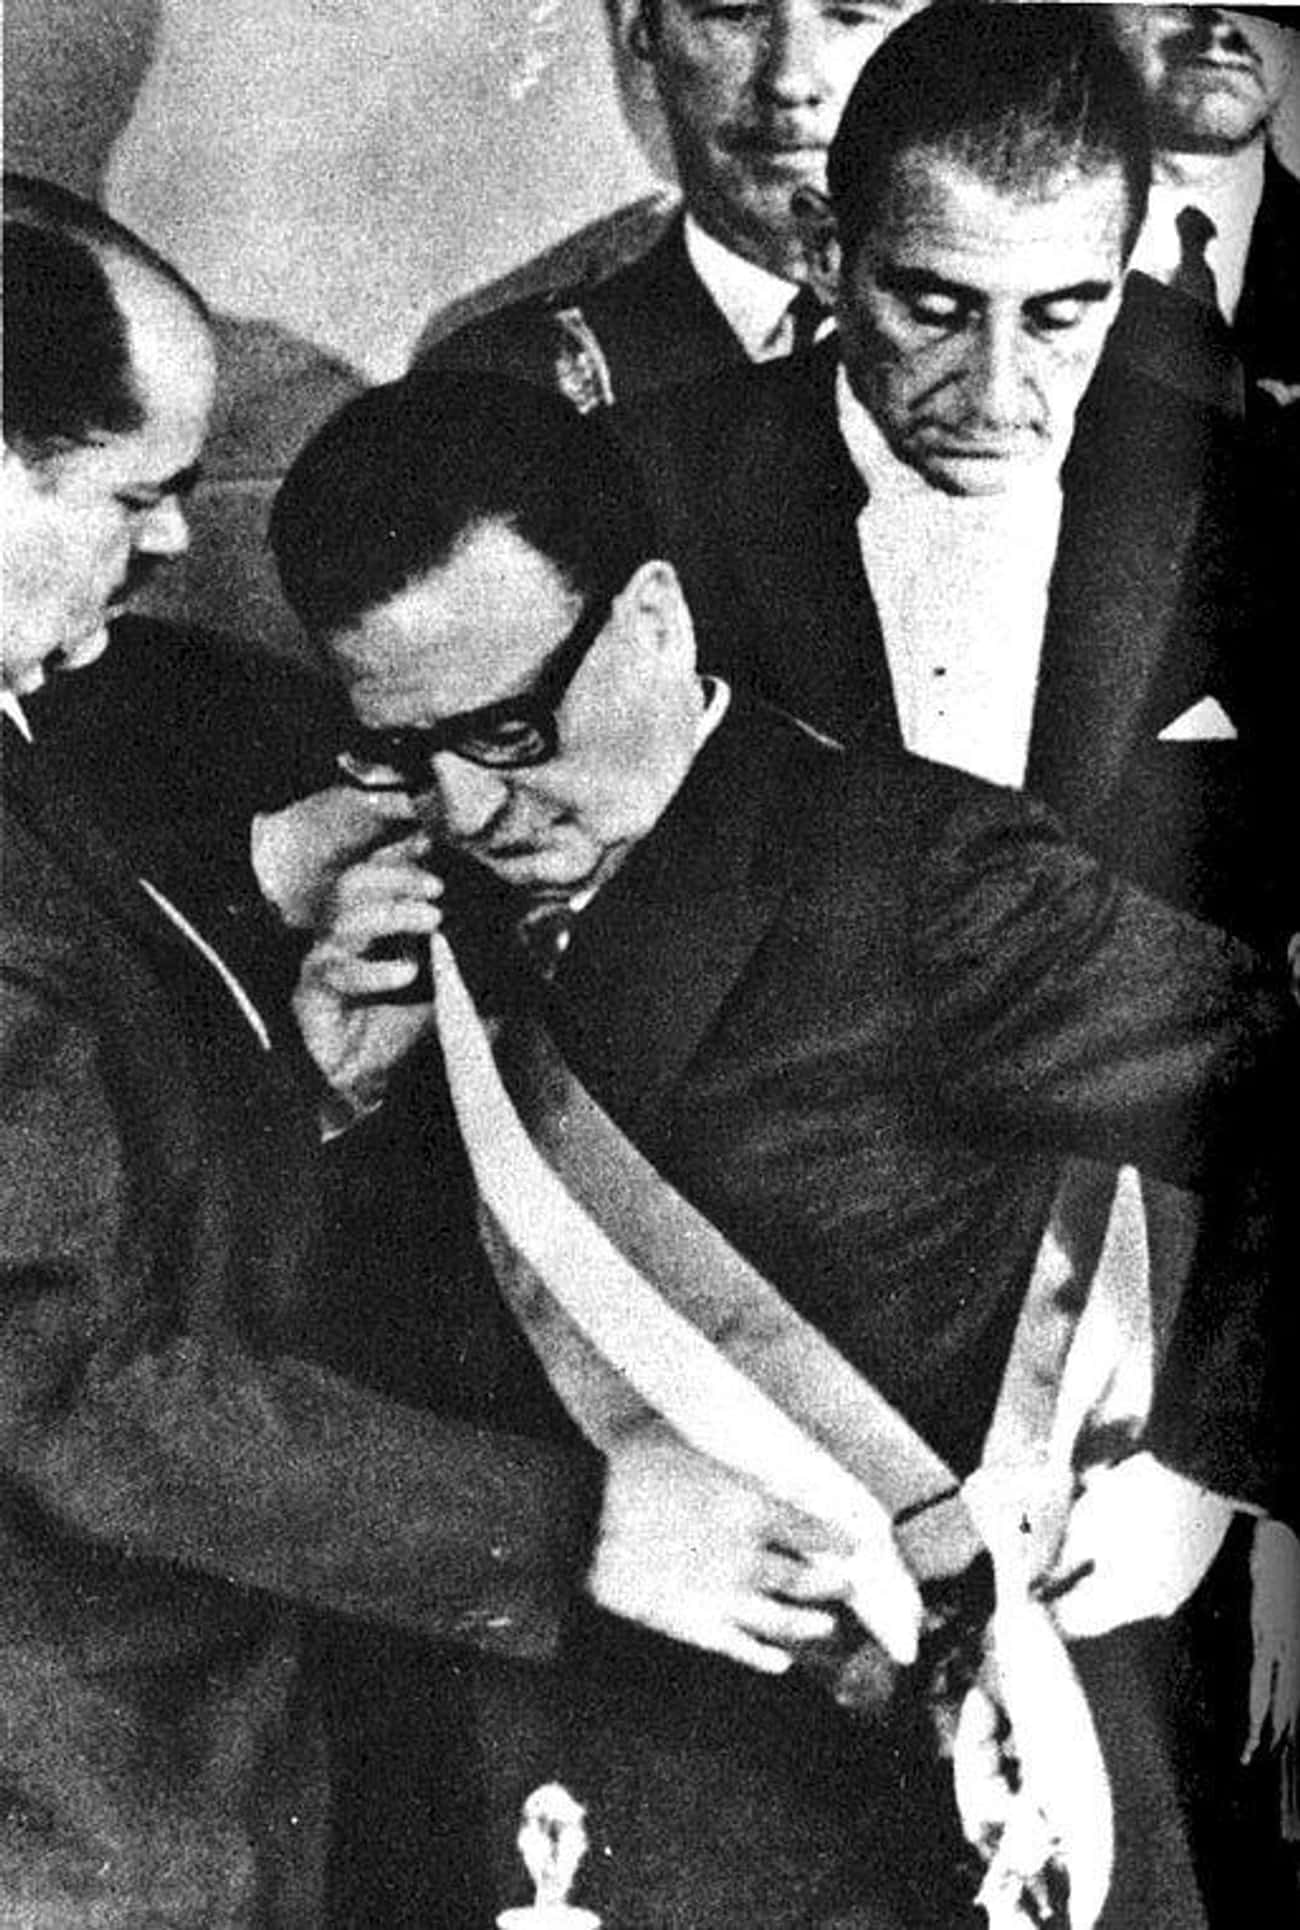 Salvador Allende Was A Socialist Who Repeatedly Tried To Become President Of Chile